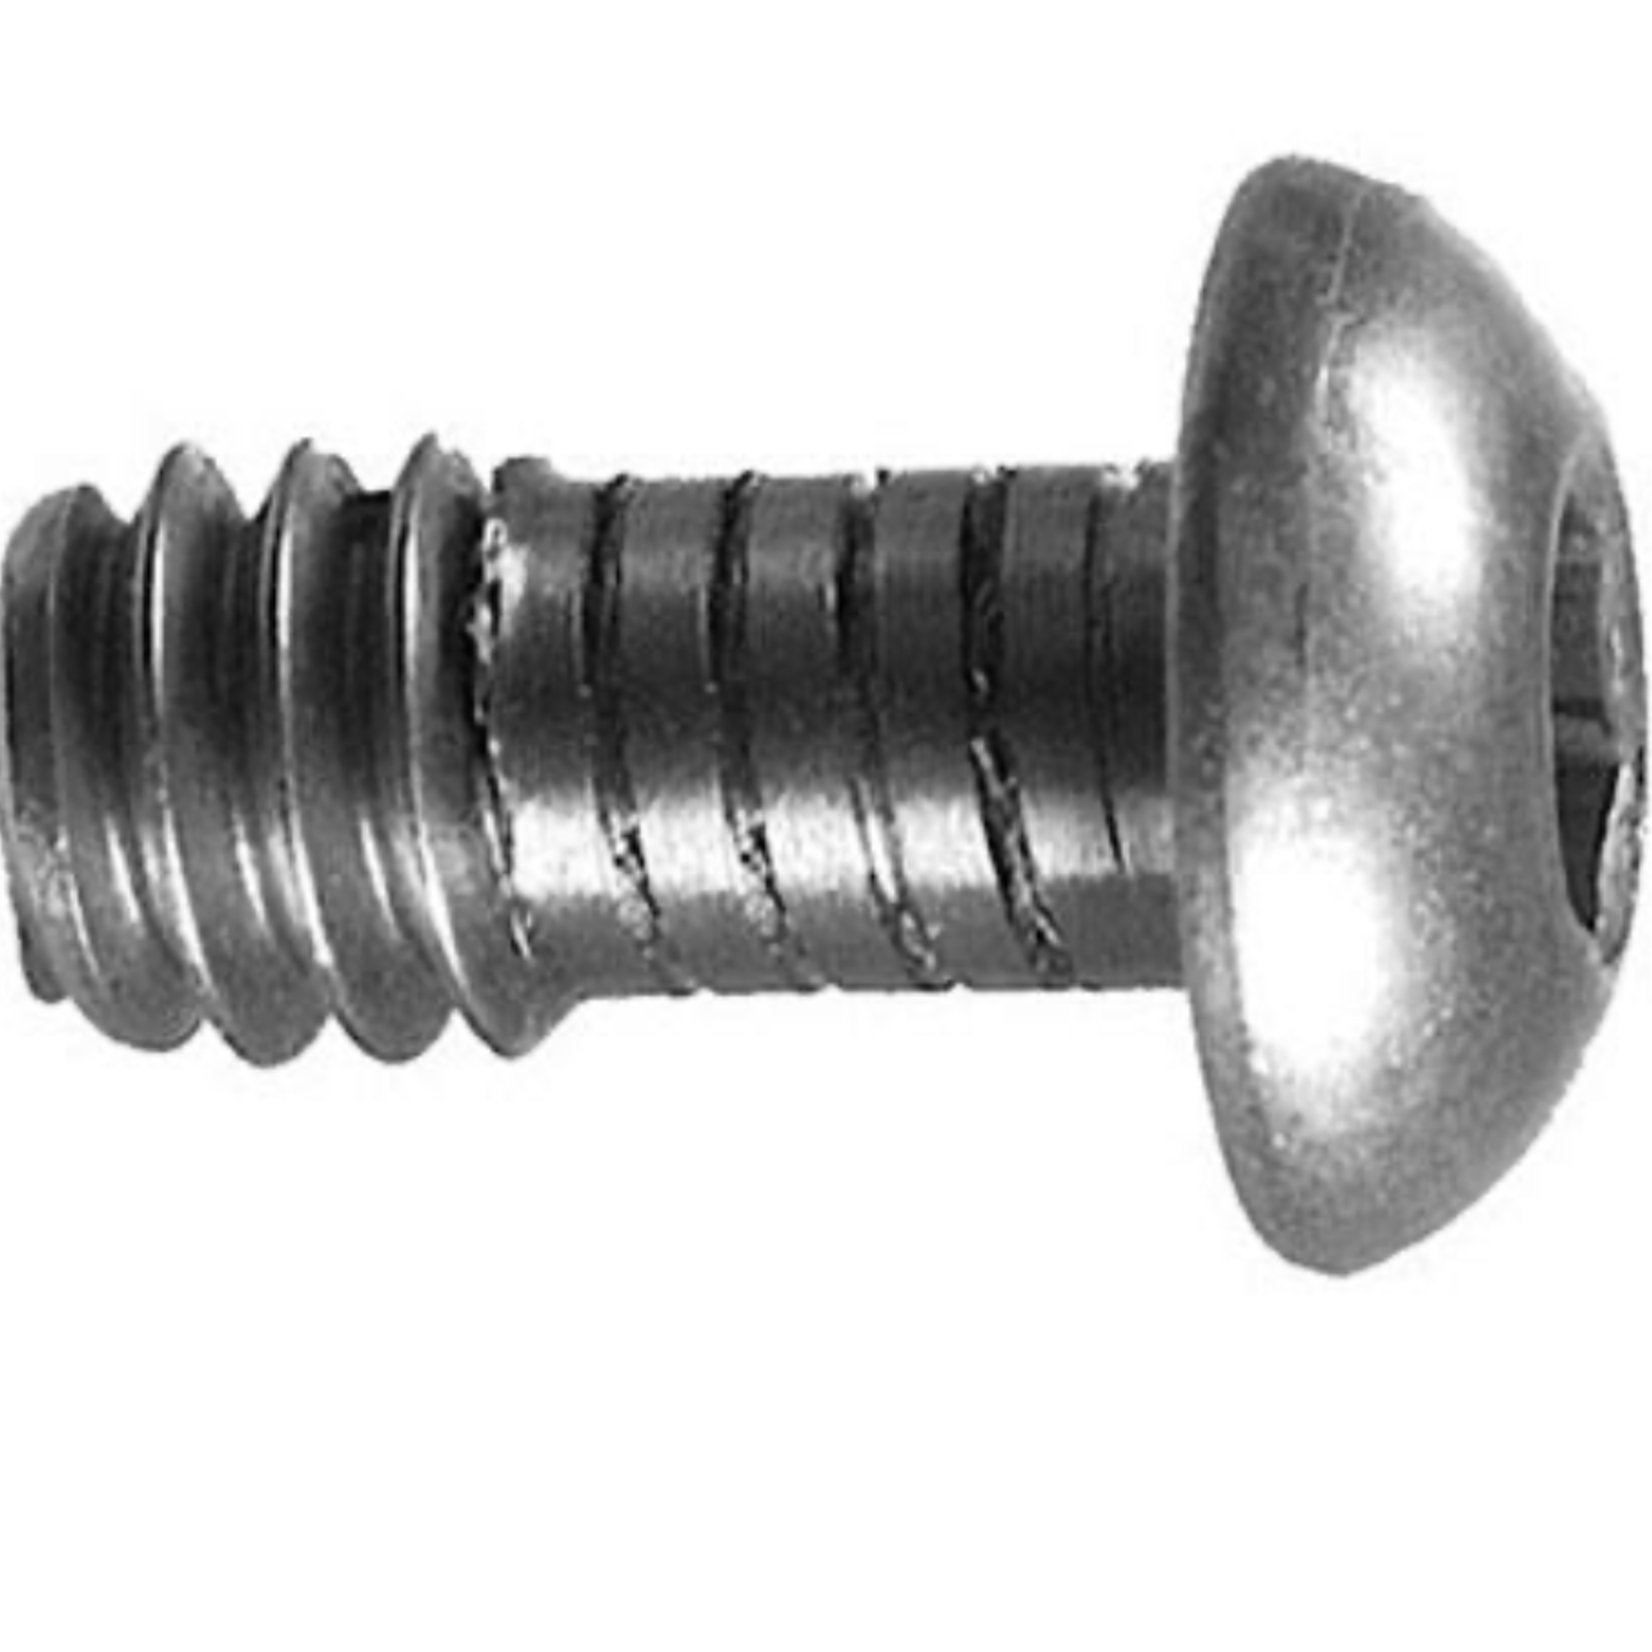 Wimberley Wimberley SW-100 Extra Screw (1/4-20") for Quick Release Plates